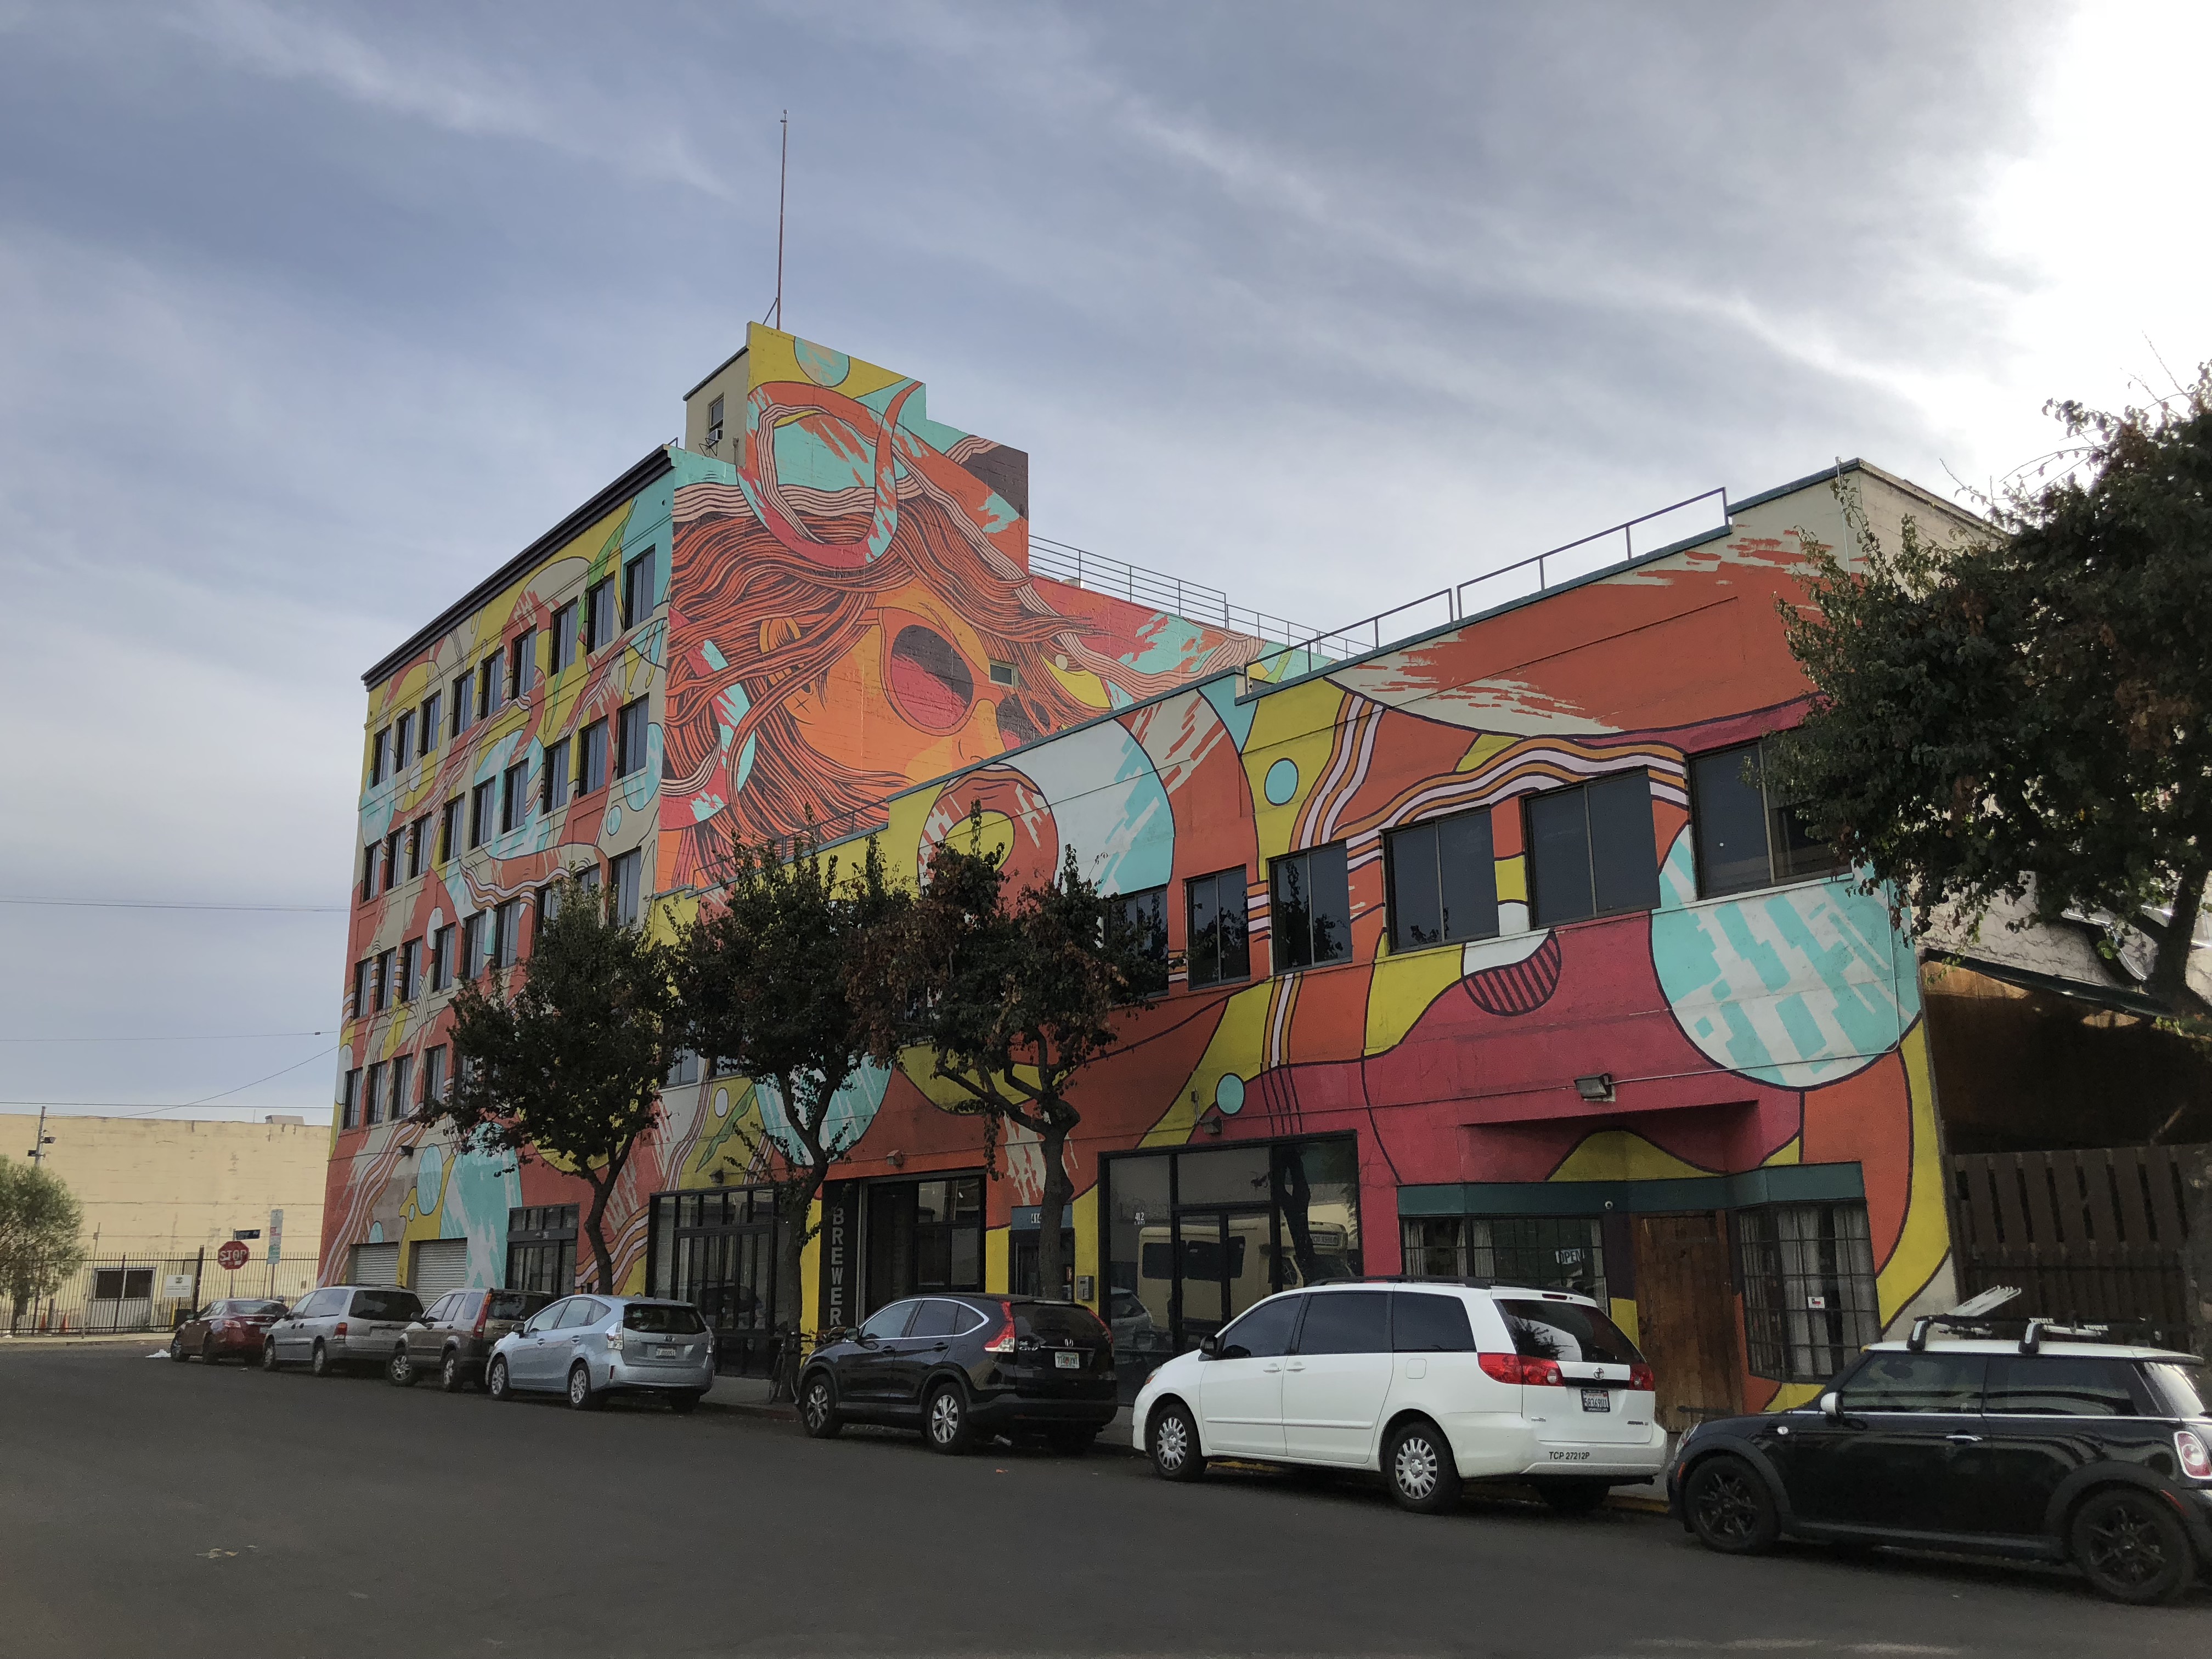 Mumford Brewing is located on the edge of downtown Los Angeles. The brewery is located in part of this creatively painted building.